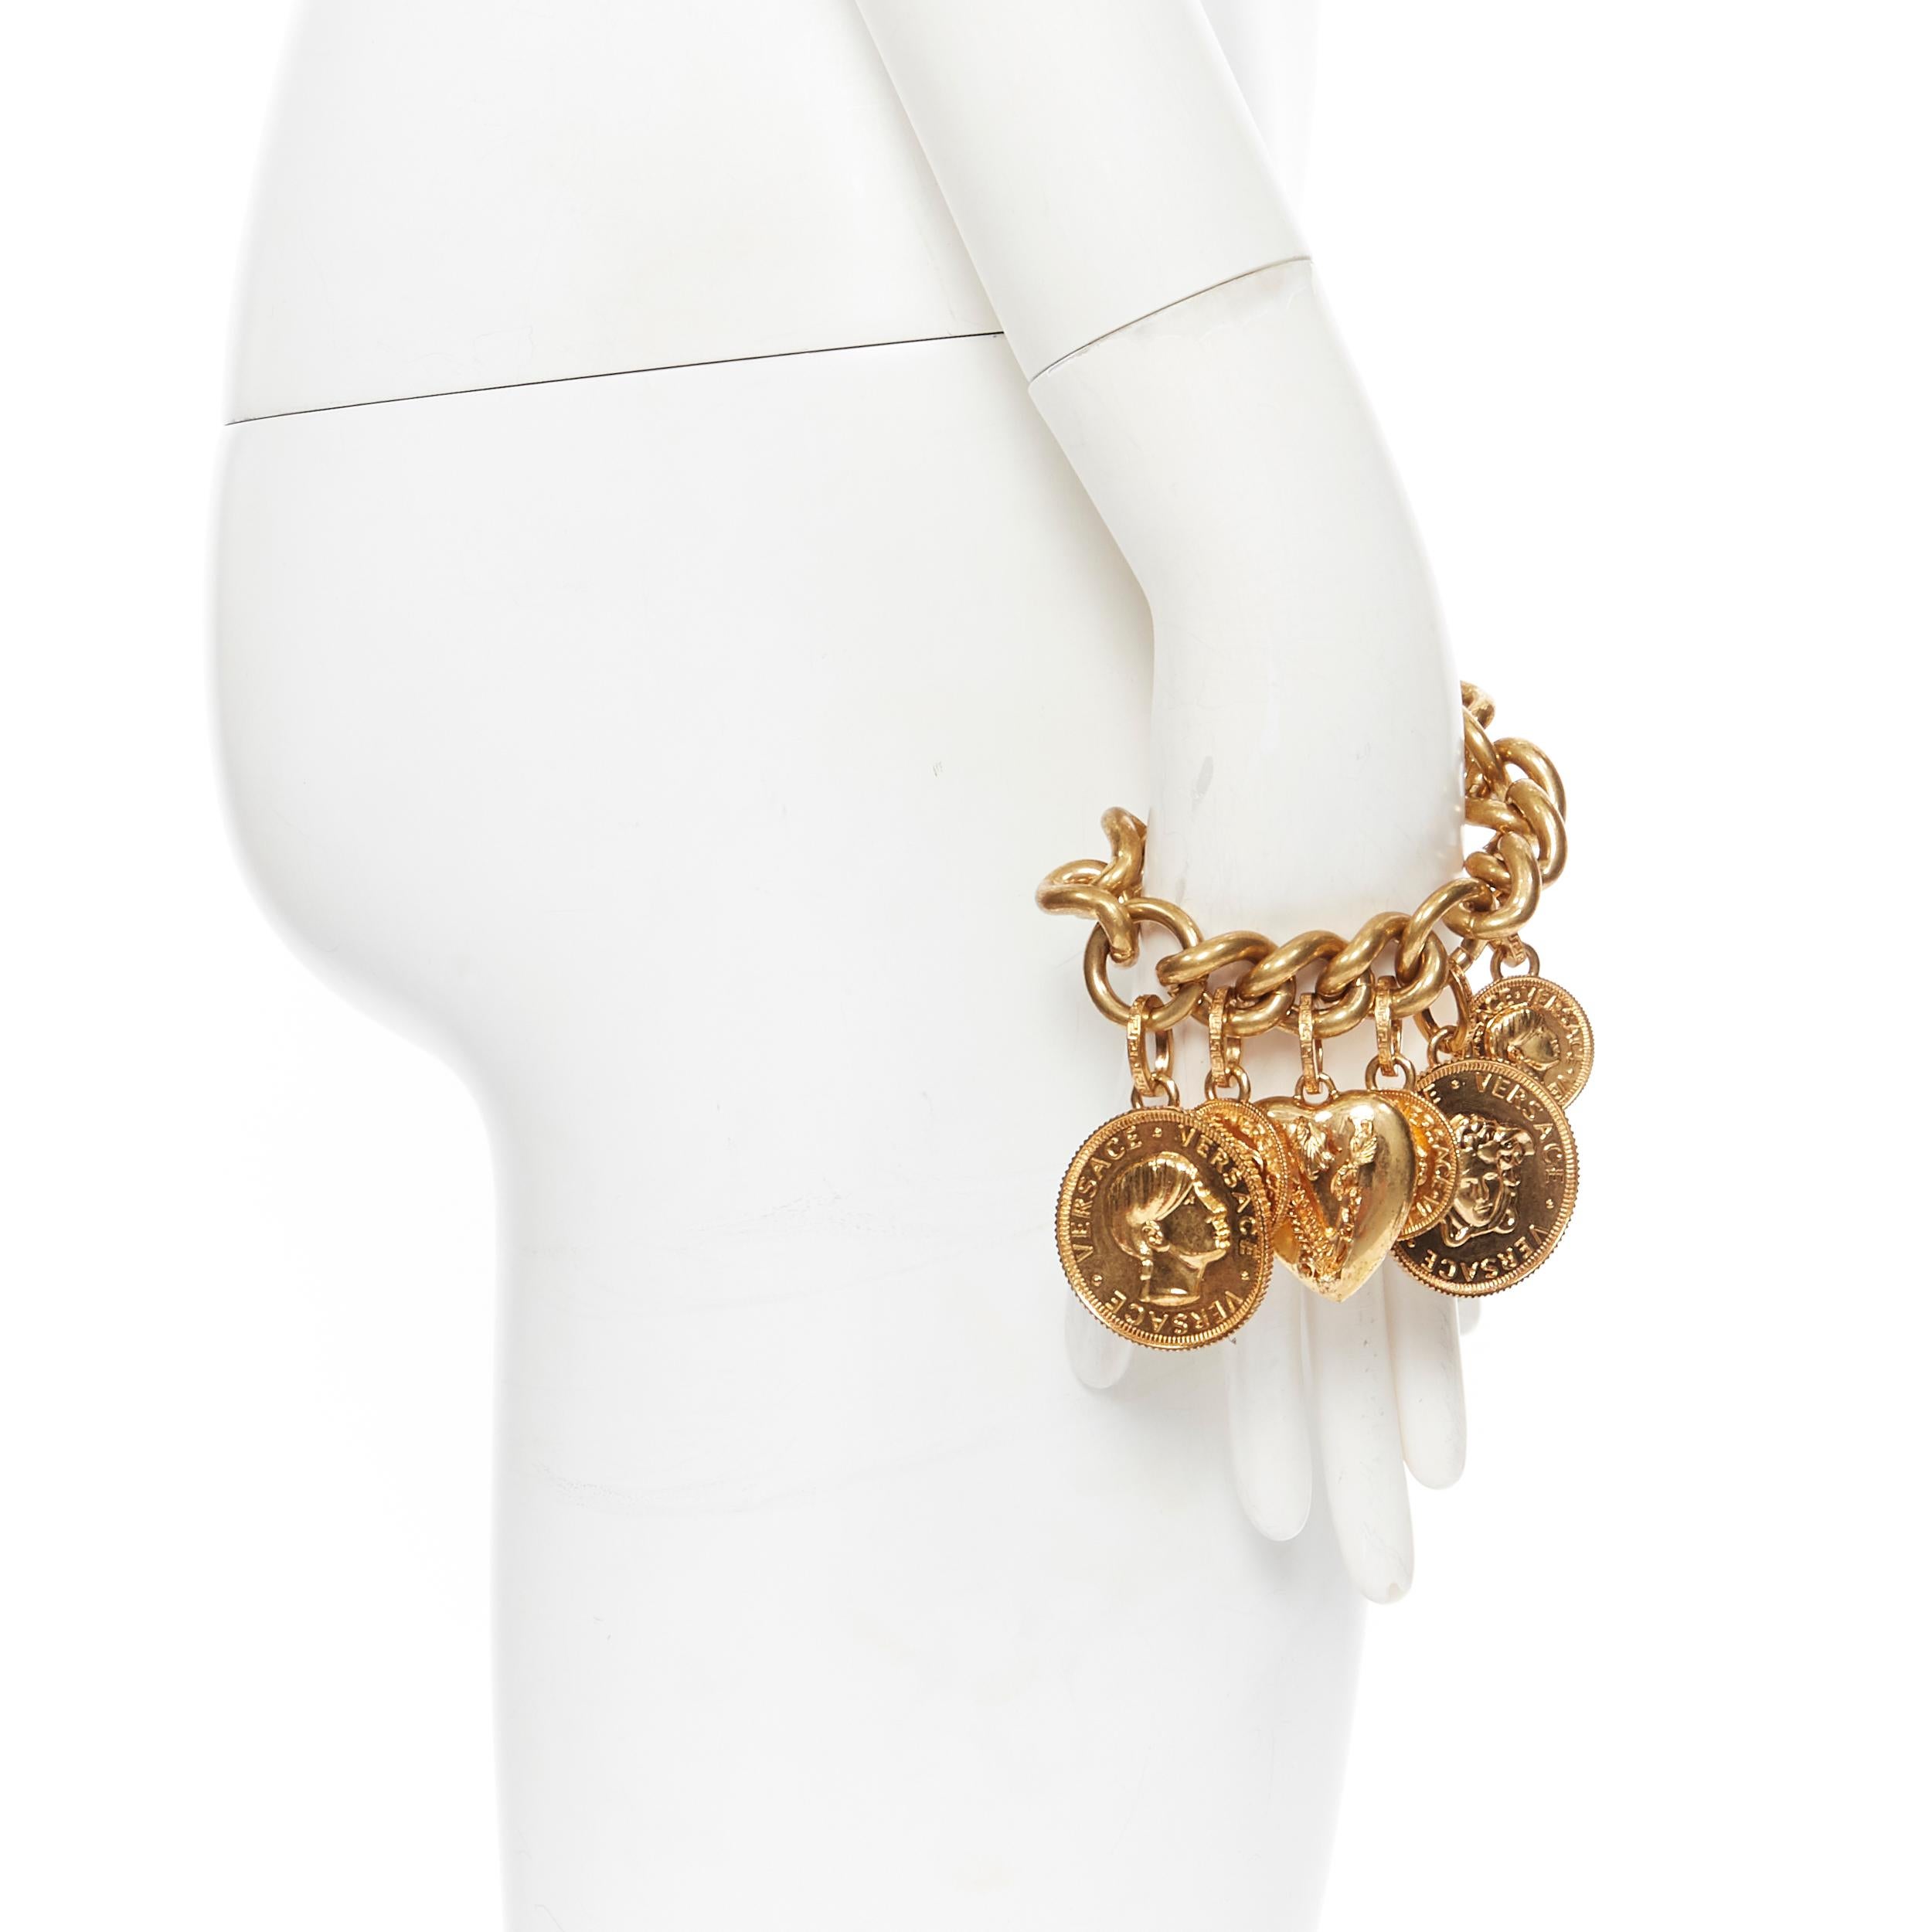 new VERSACE gold plated Medusa medallion coin V-Mine Heart charm chunky bracelet
Brand: Versace
Designer: Donatella Versace
Collection: 2019
Model Name / Style: Chunky bracelet
Material: Metal
Color: Gold
Pattern: Solid
Closure: Clasp
Extra Detail: